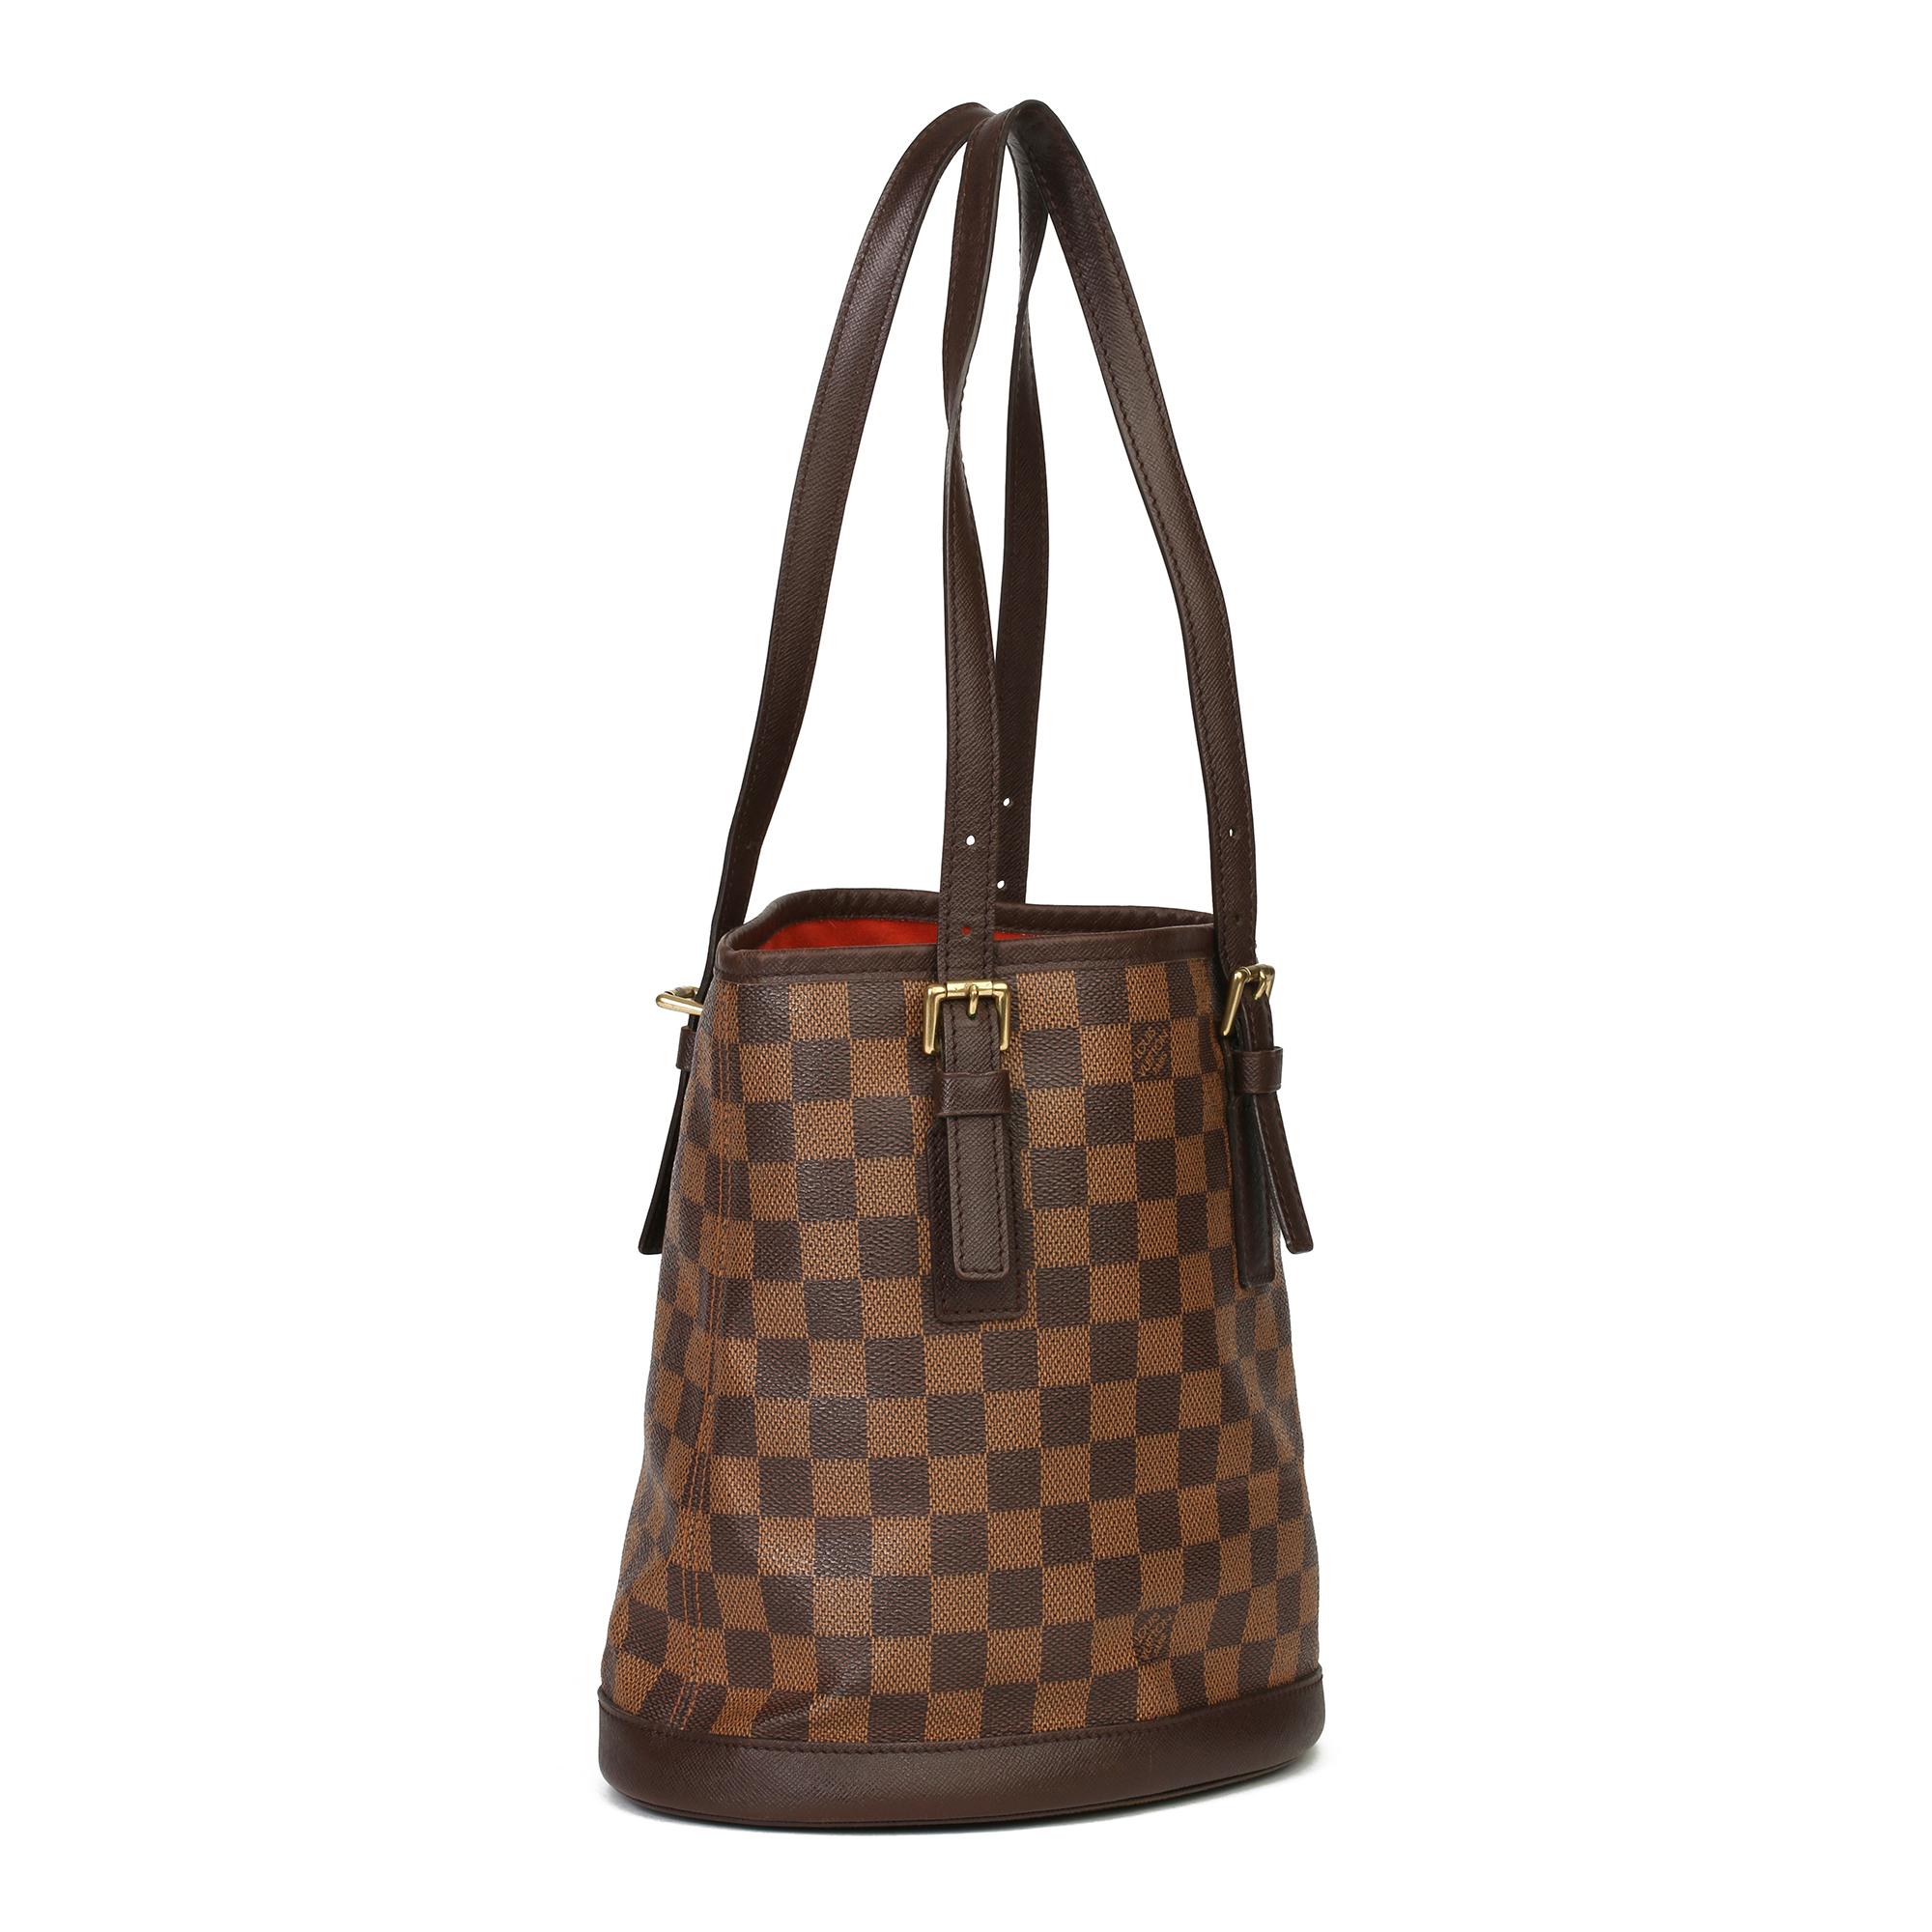 LOUIS VUITTON
Brown Damier Ebene Coated Canvas Vintage Bucket Bag

Xupes Reference: CB298
Serial Number: SP1918
Age (Circa): 1998
Accompanied By: Louis Vuitton Dust Bag
Authenticity Details: Date Stamp (Made in France) 
Gender: Ladies
Type: